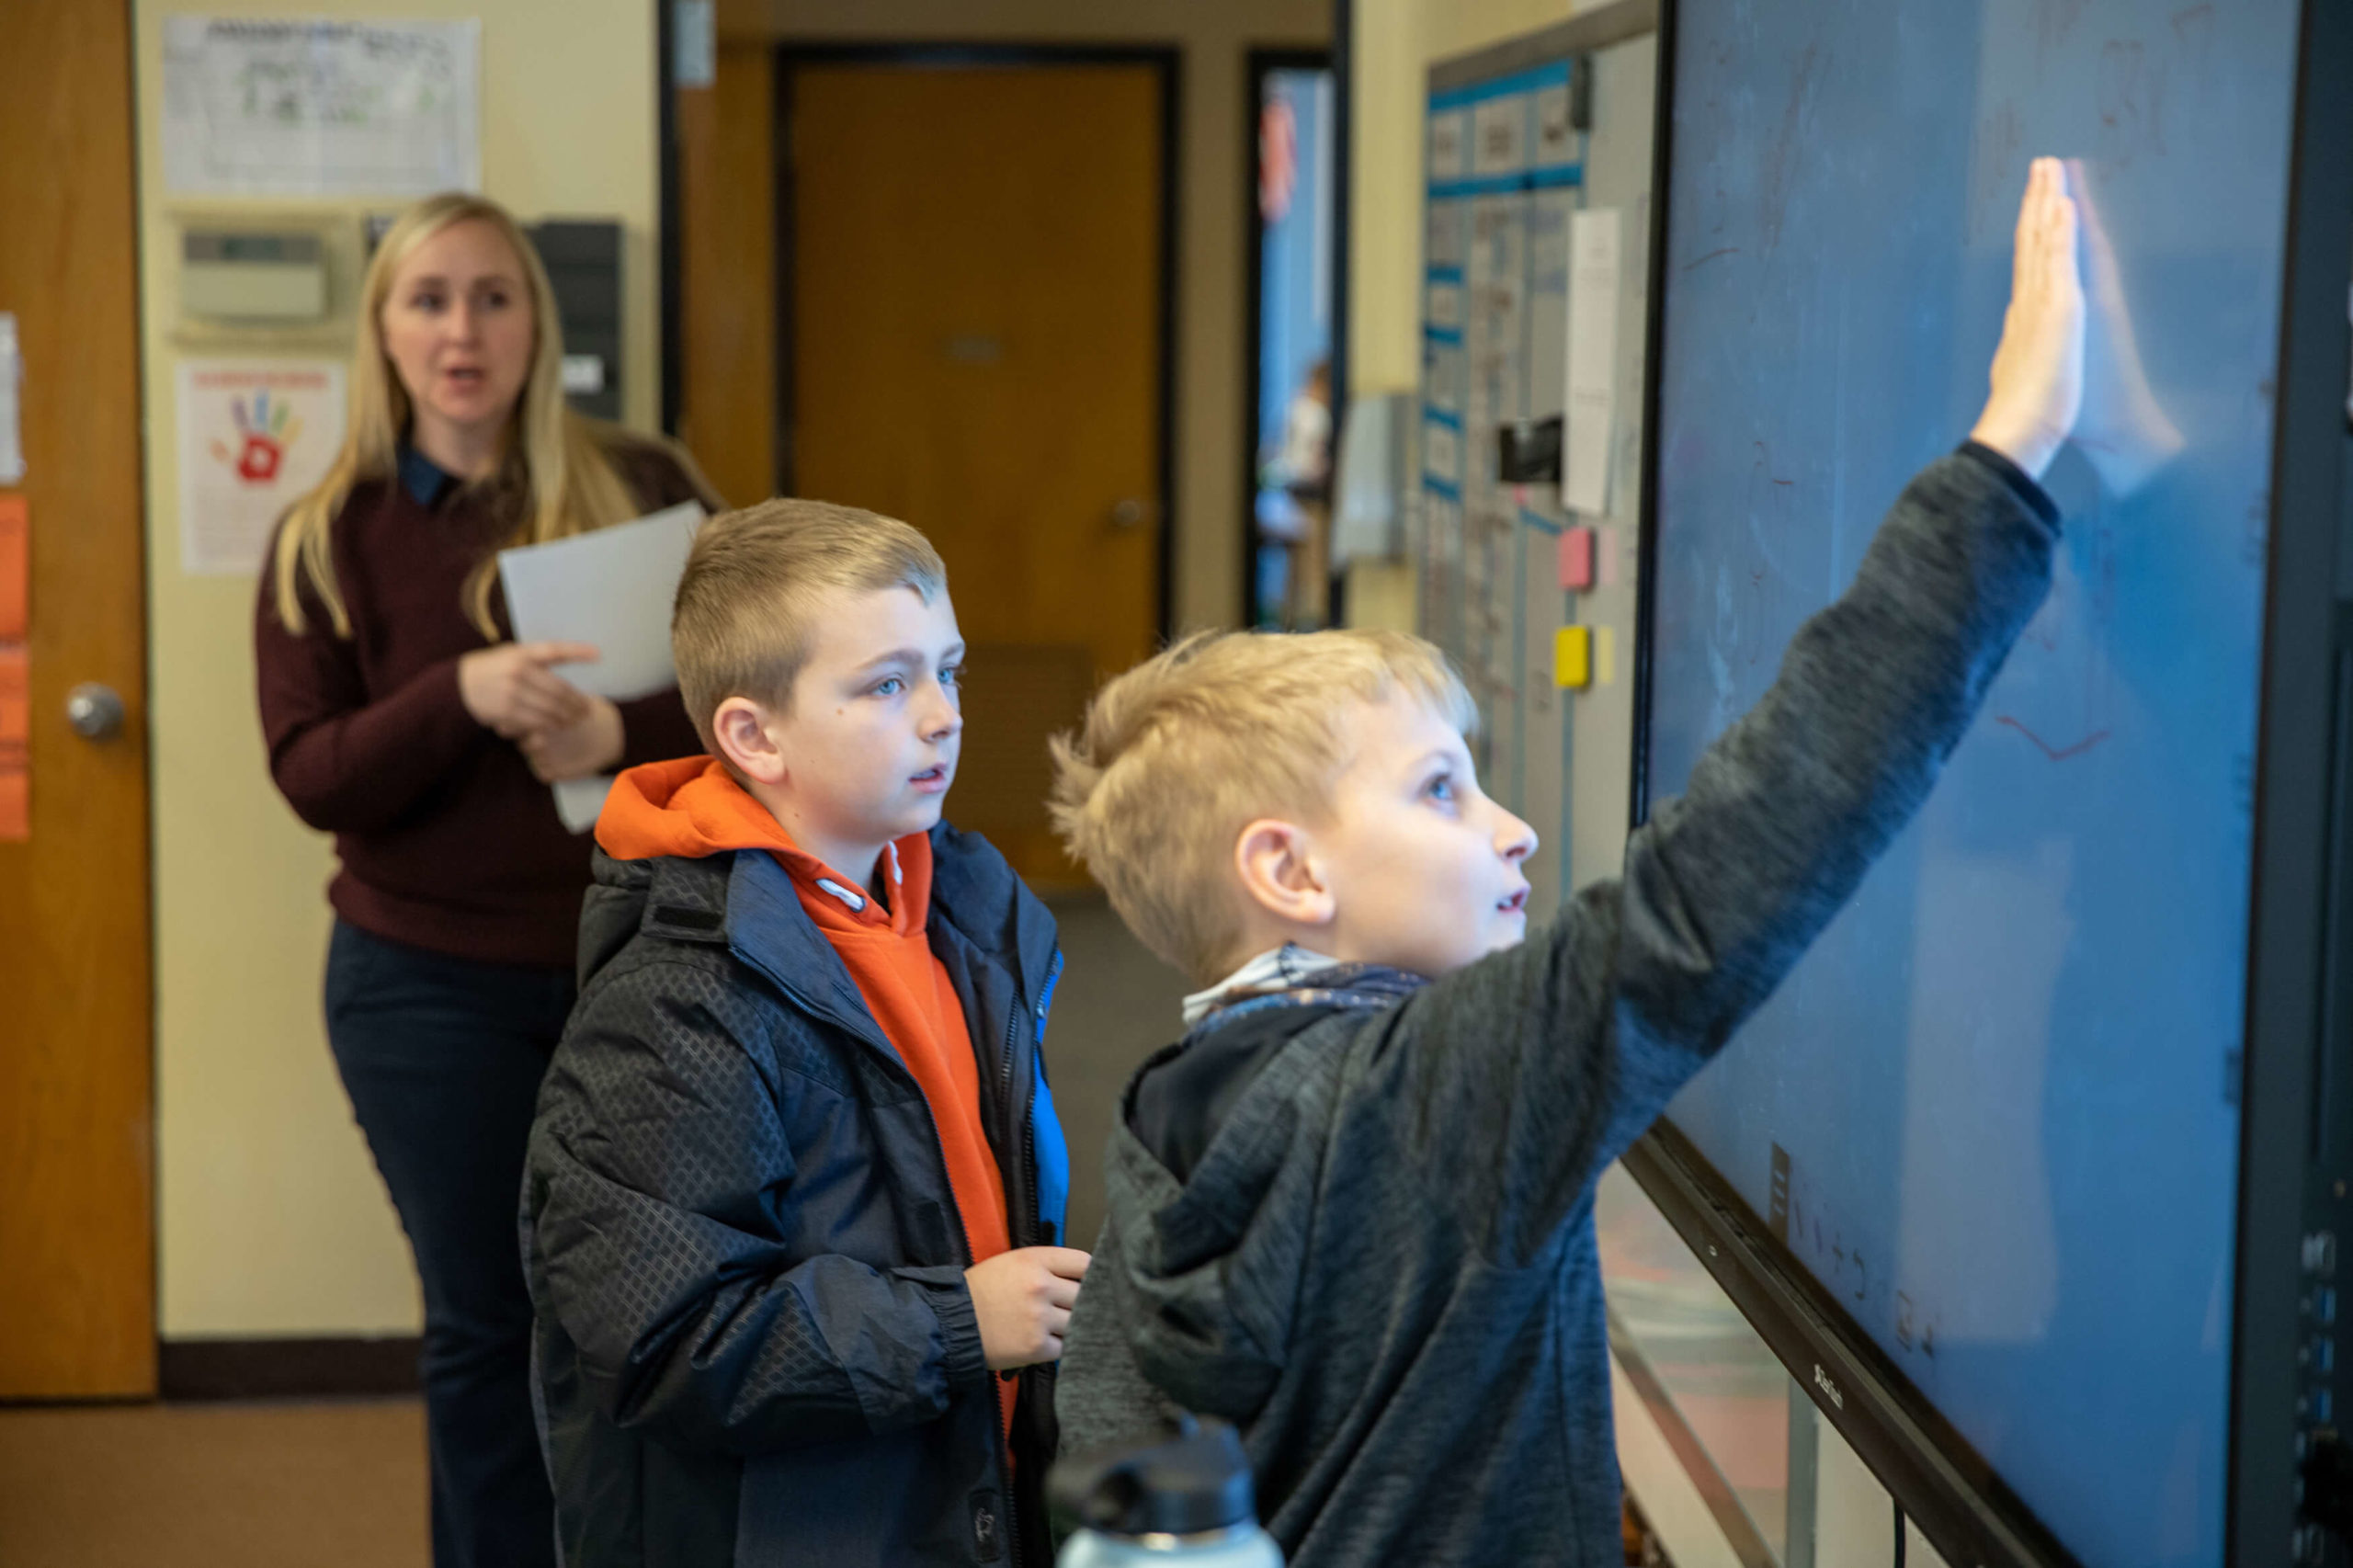 Children using an interactive board during class in the hagerman school district.